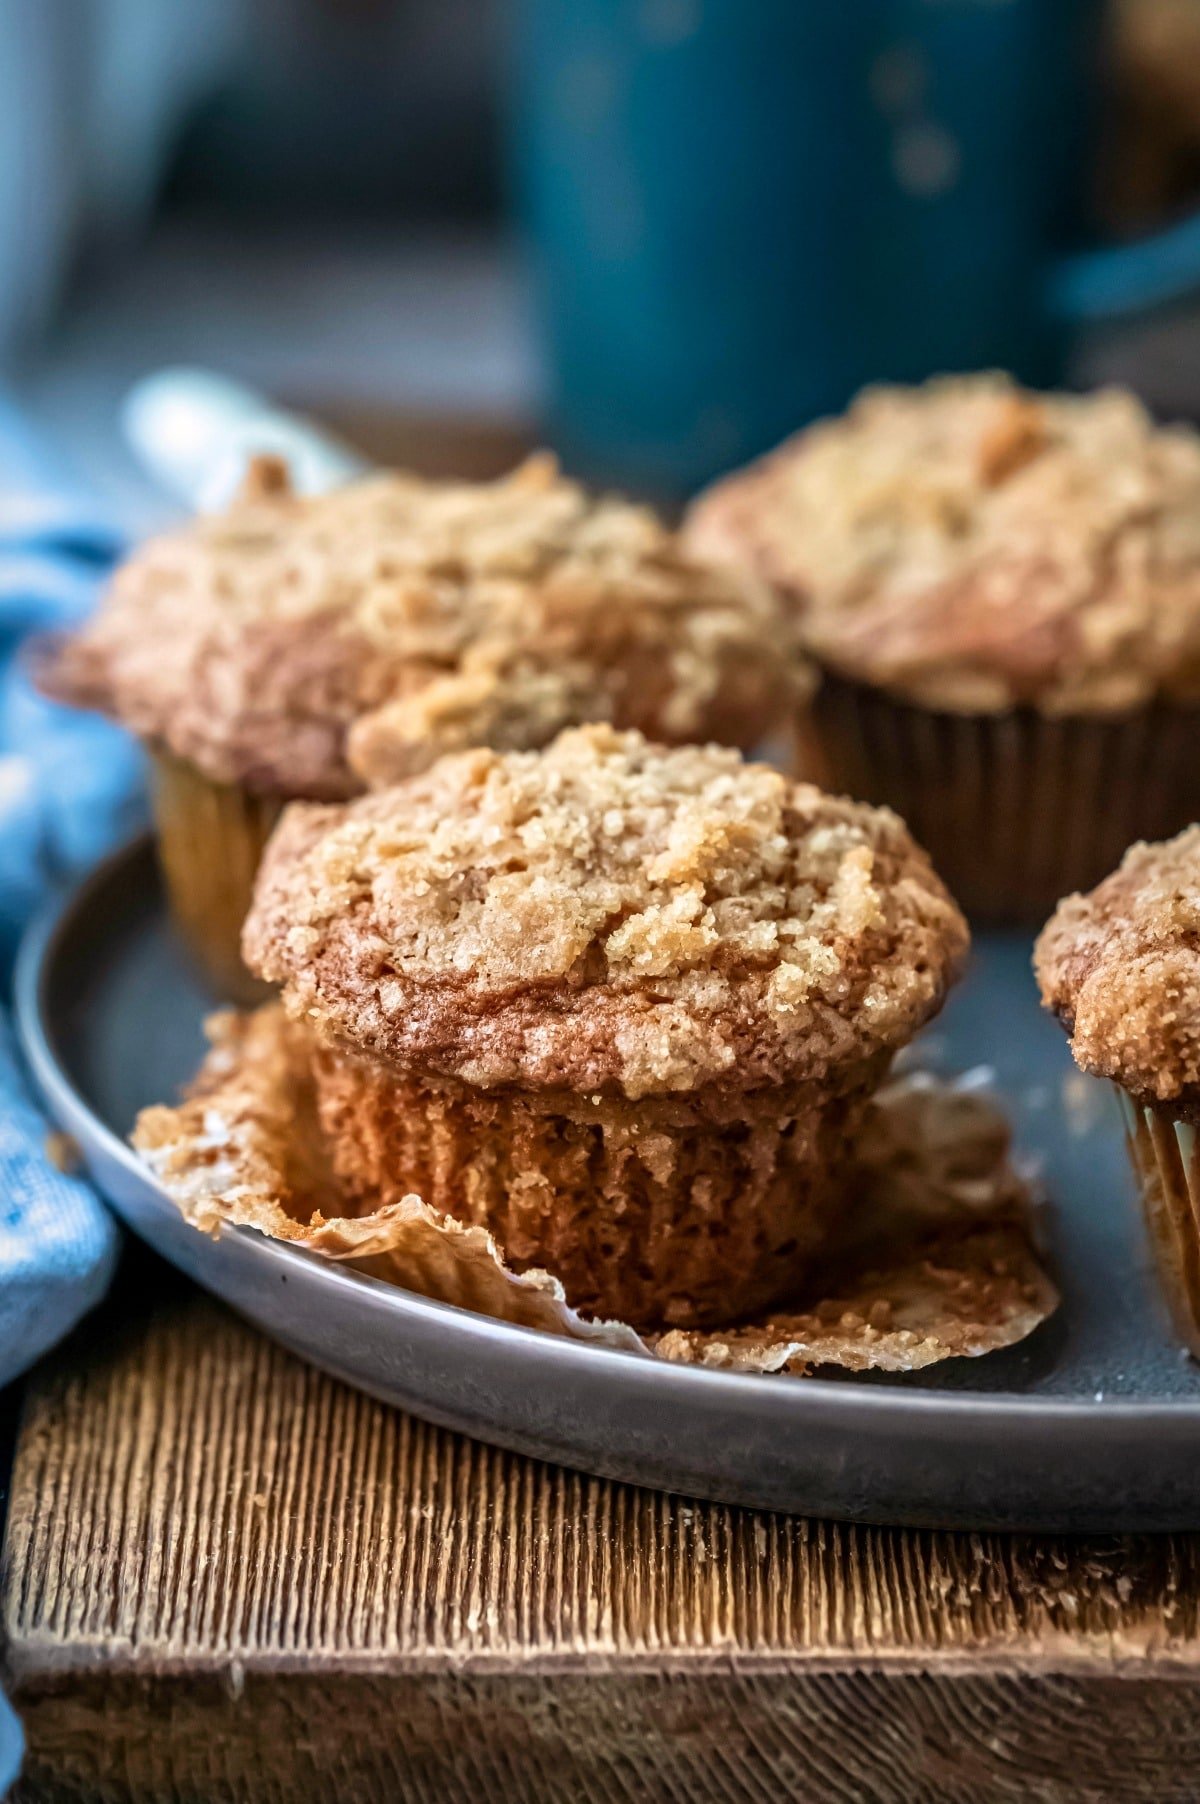 Gray plate with four banana crumb muffins on it